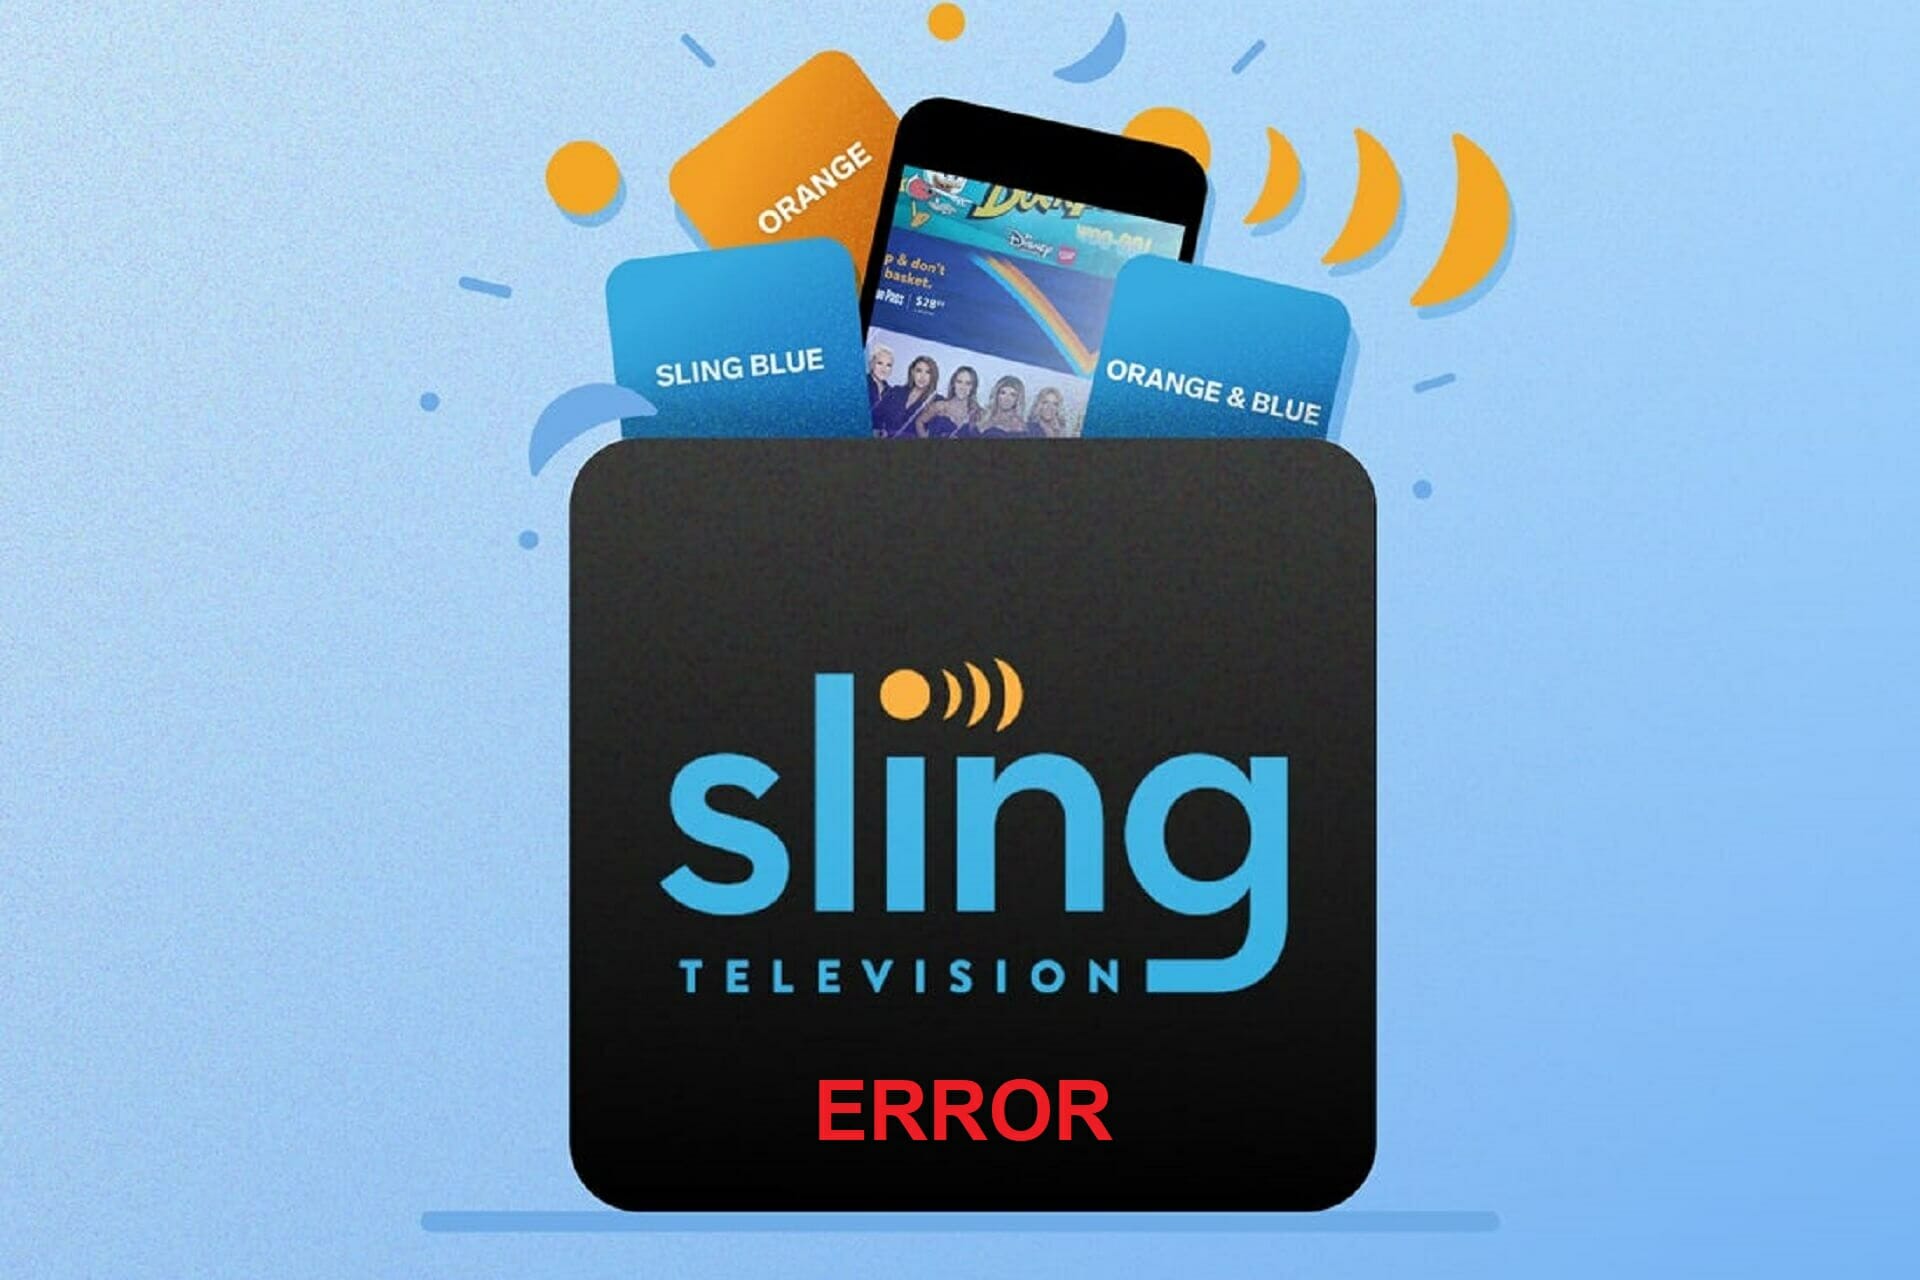 How to fix the Sling TV error code 4-310 and 4-402 in a few easy steps